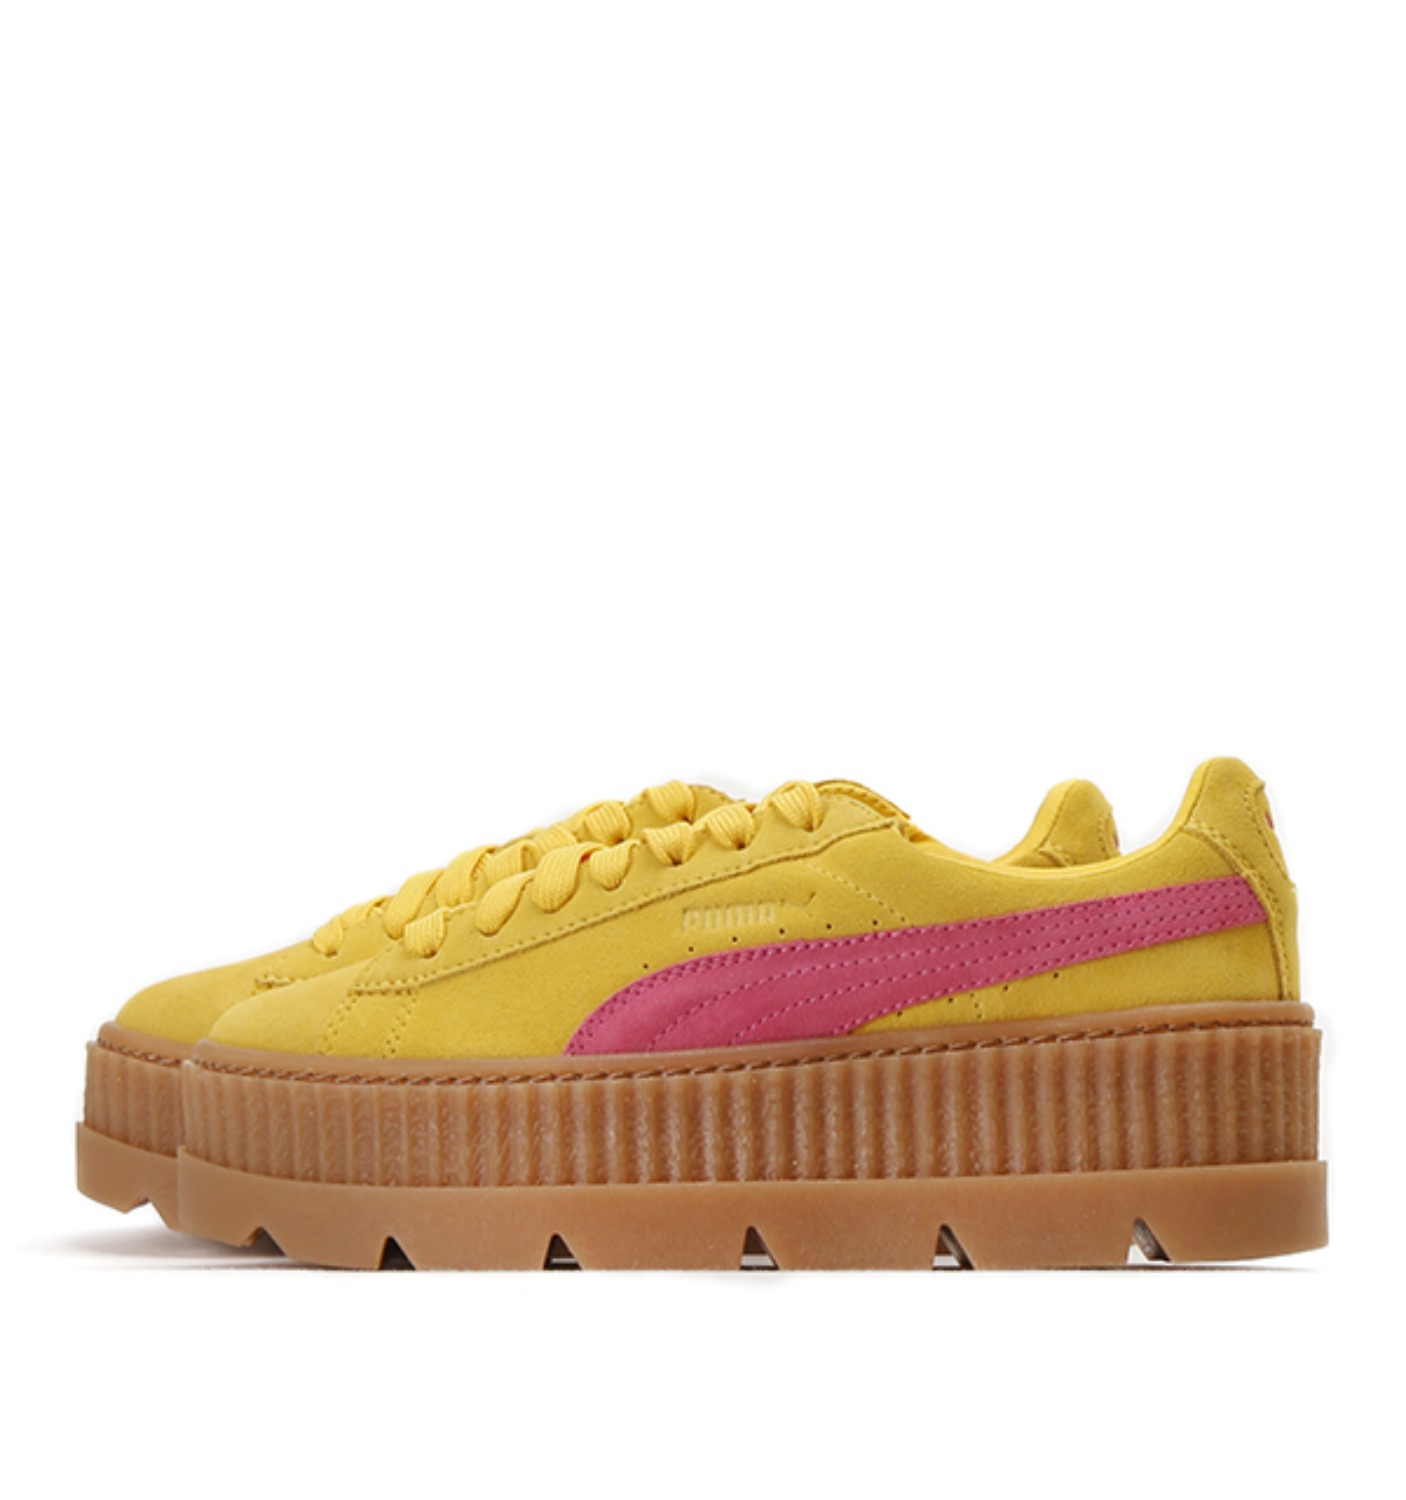 CLEATED CREEPER SUEDE LEMON (366268/03)